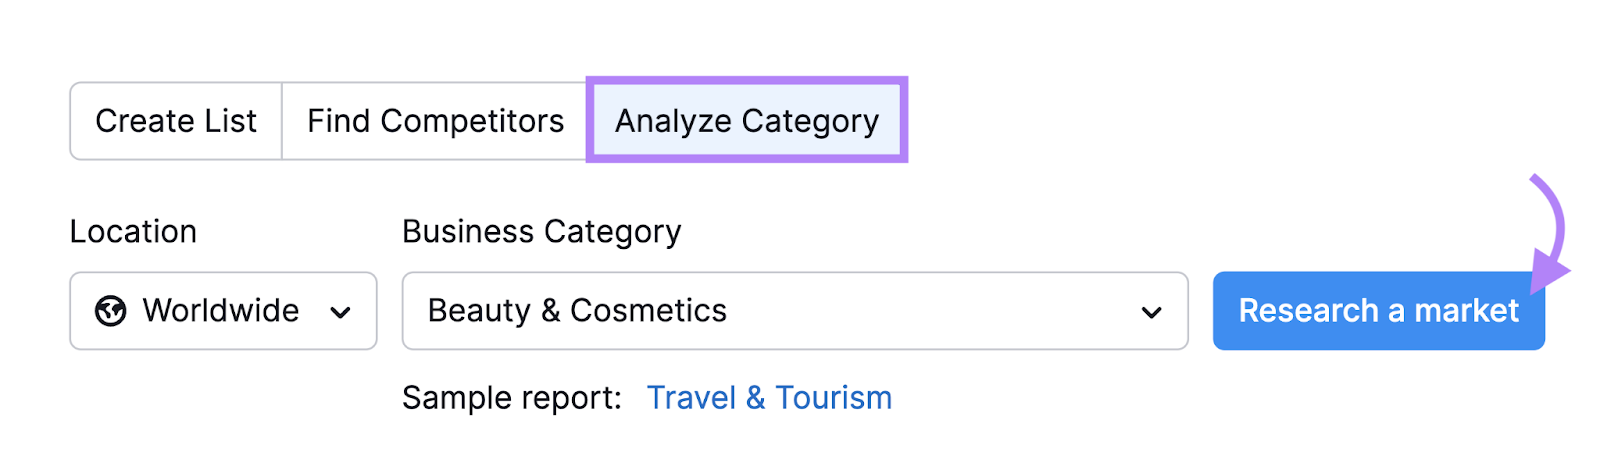 "Beauty & Cosmetics" category entered into the Market Explorer search bar